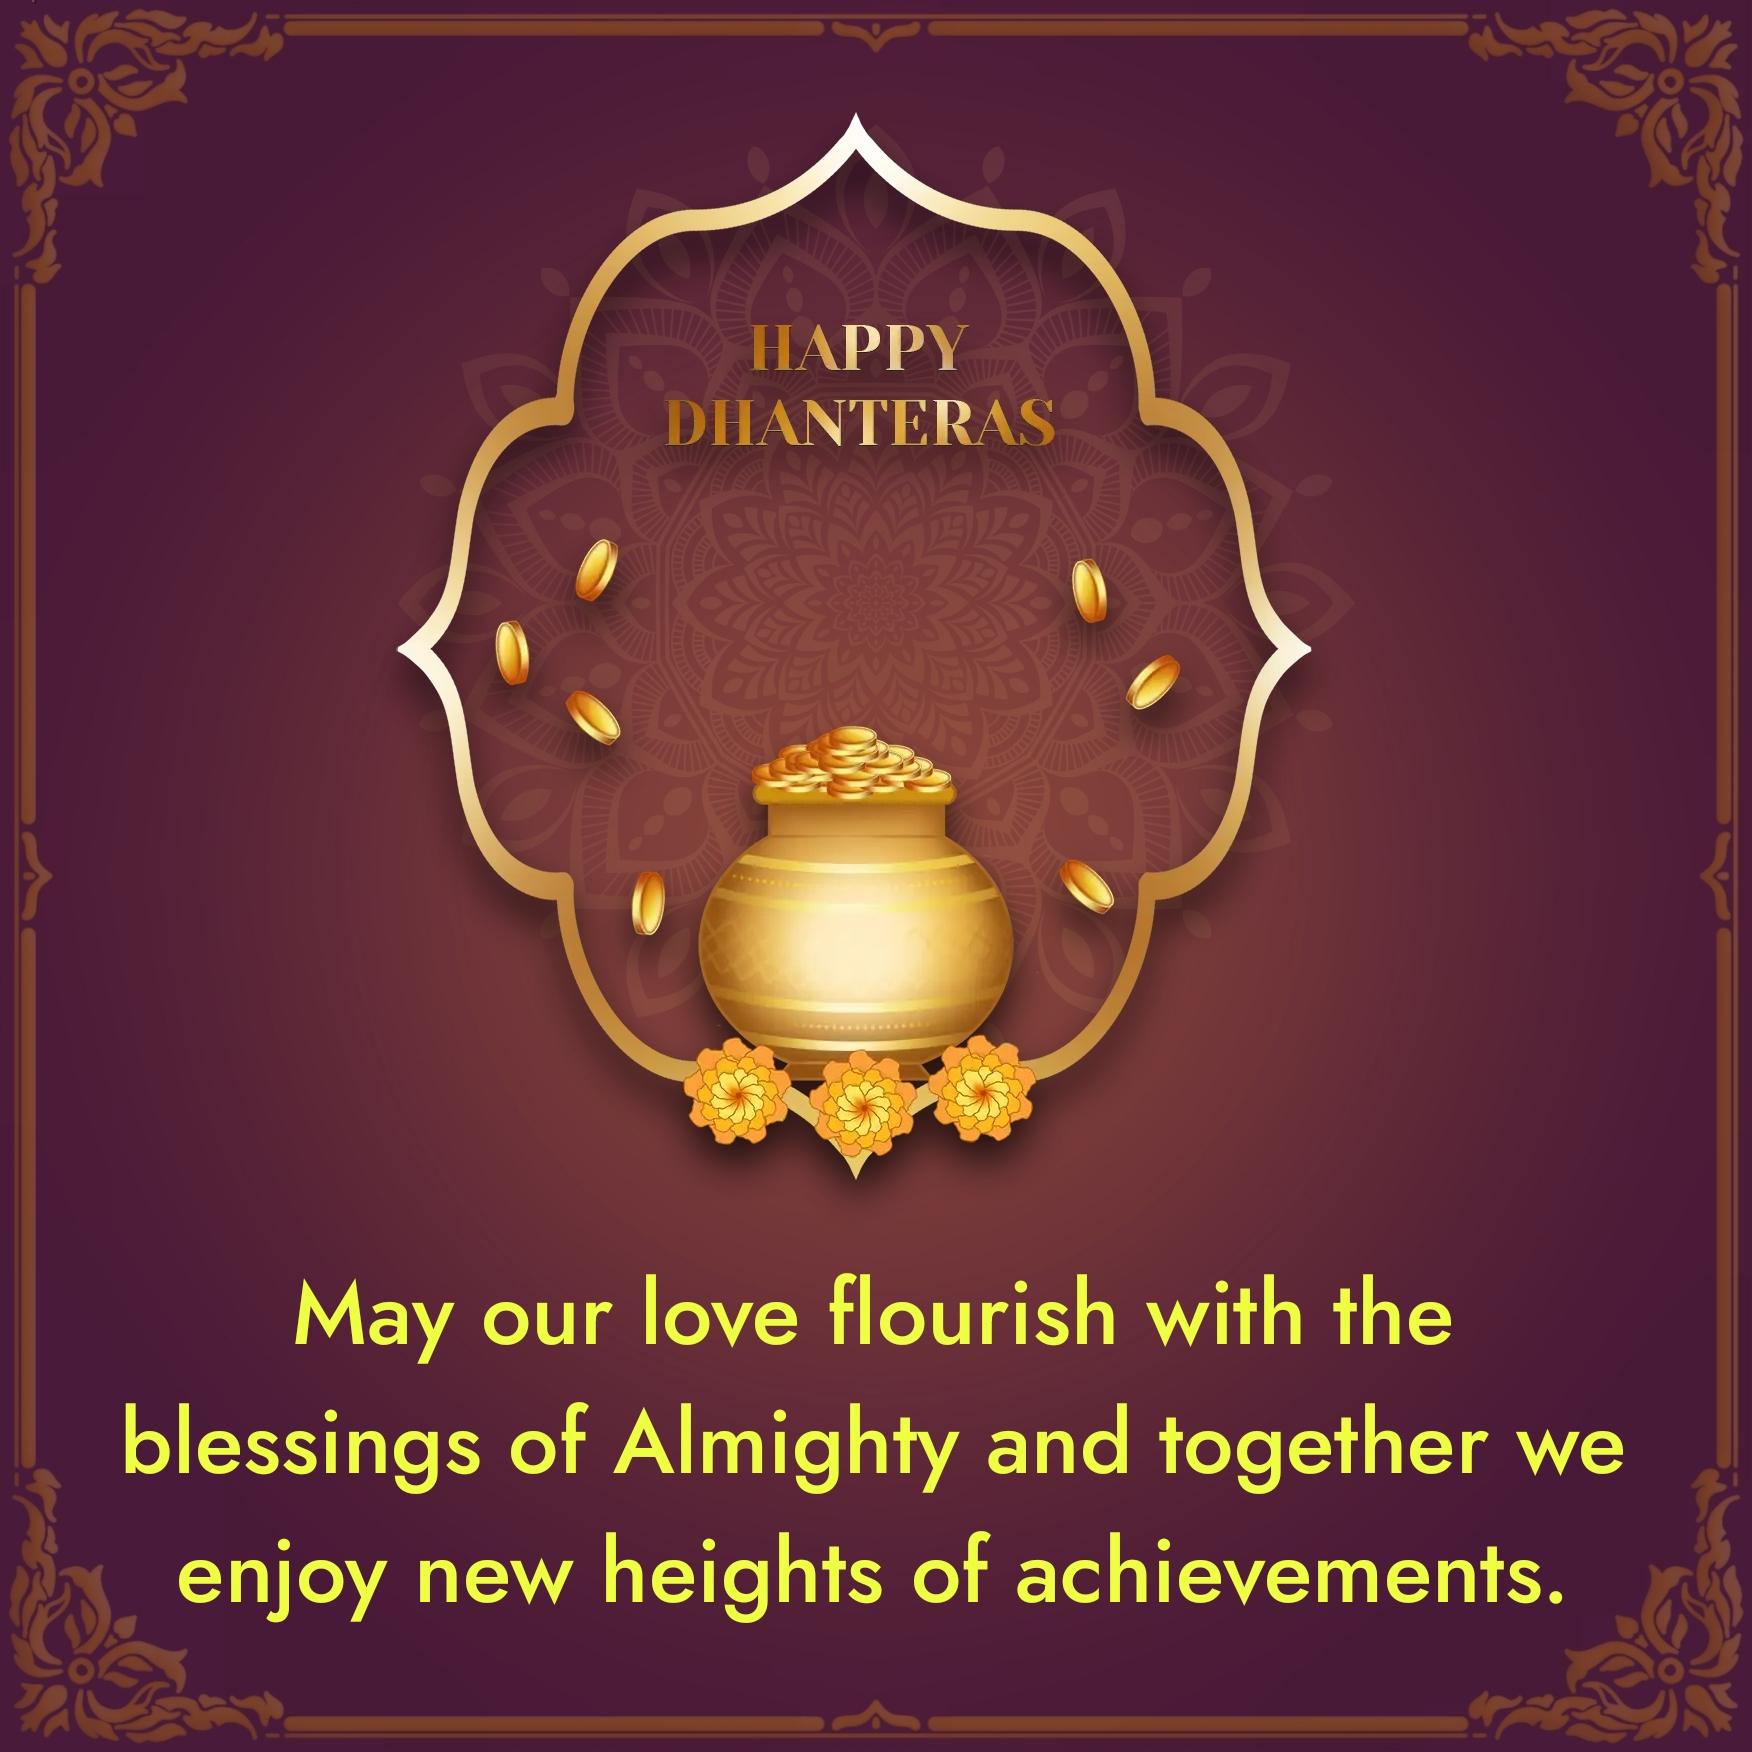 May our love flourish with the blessings of Almighty